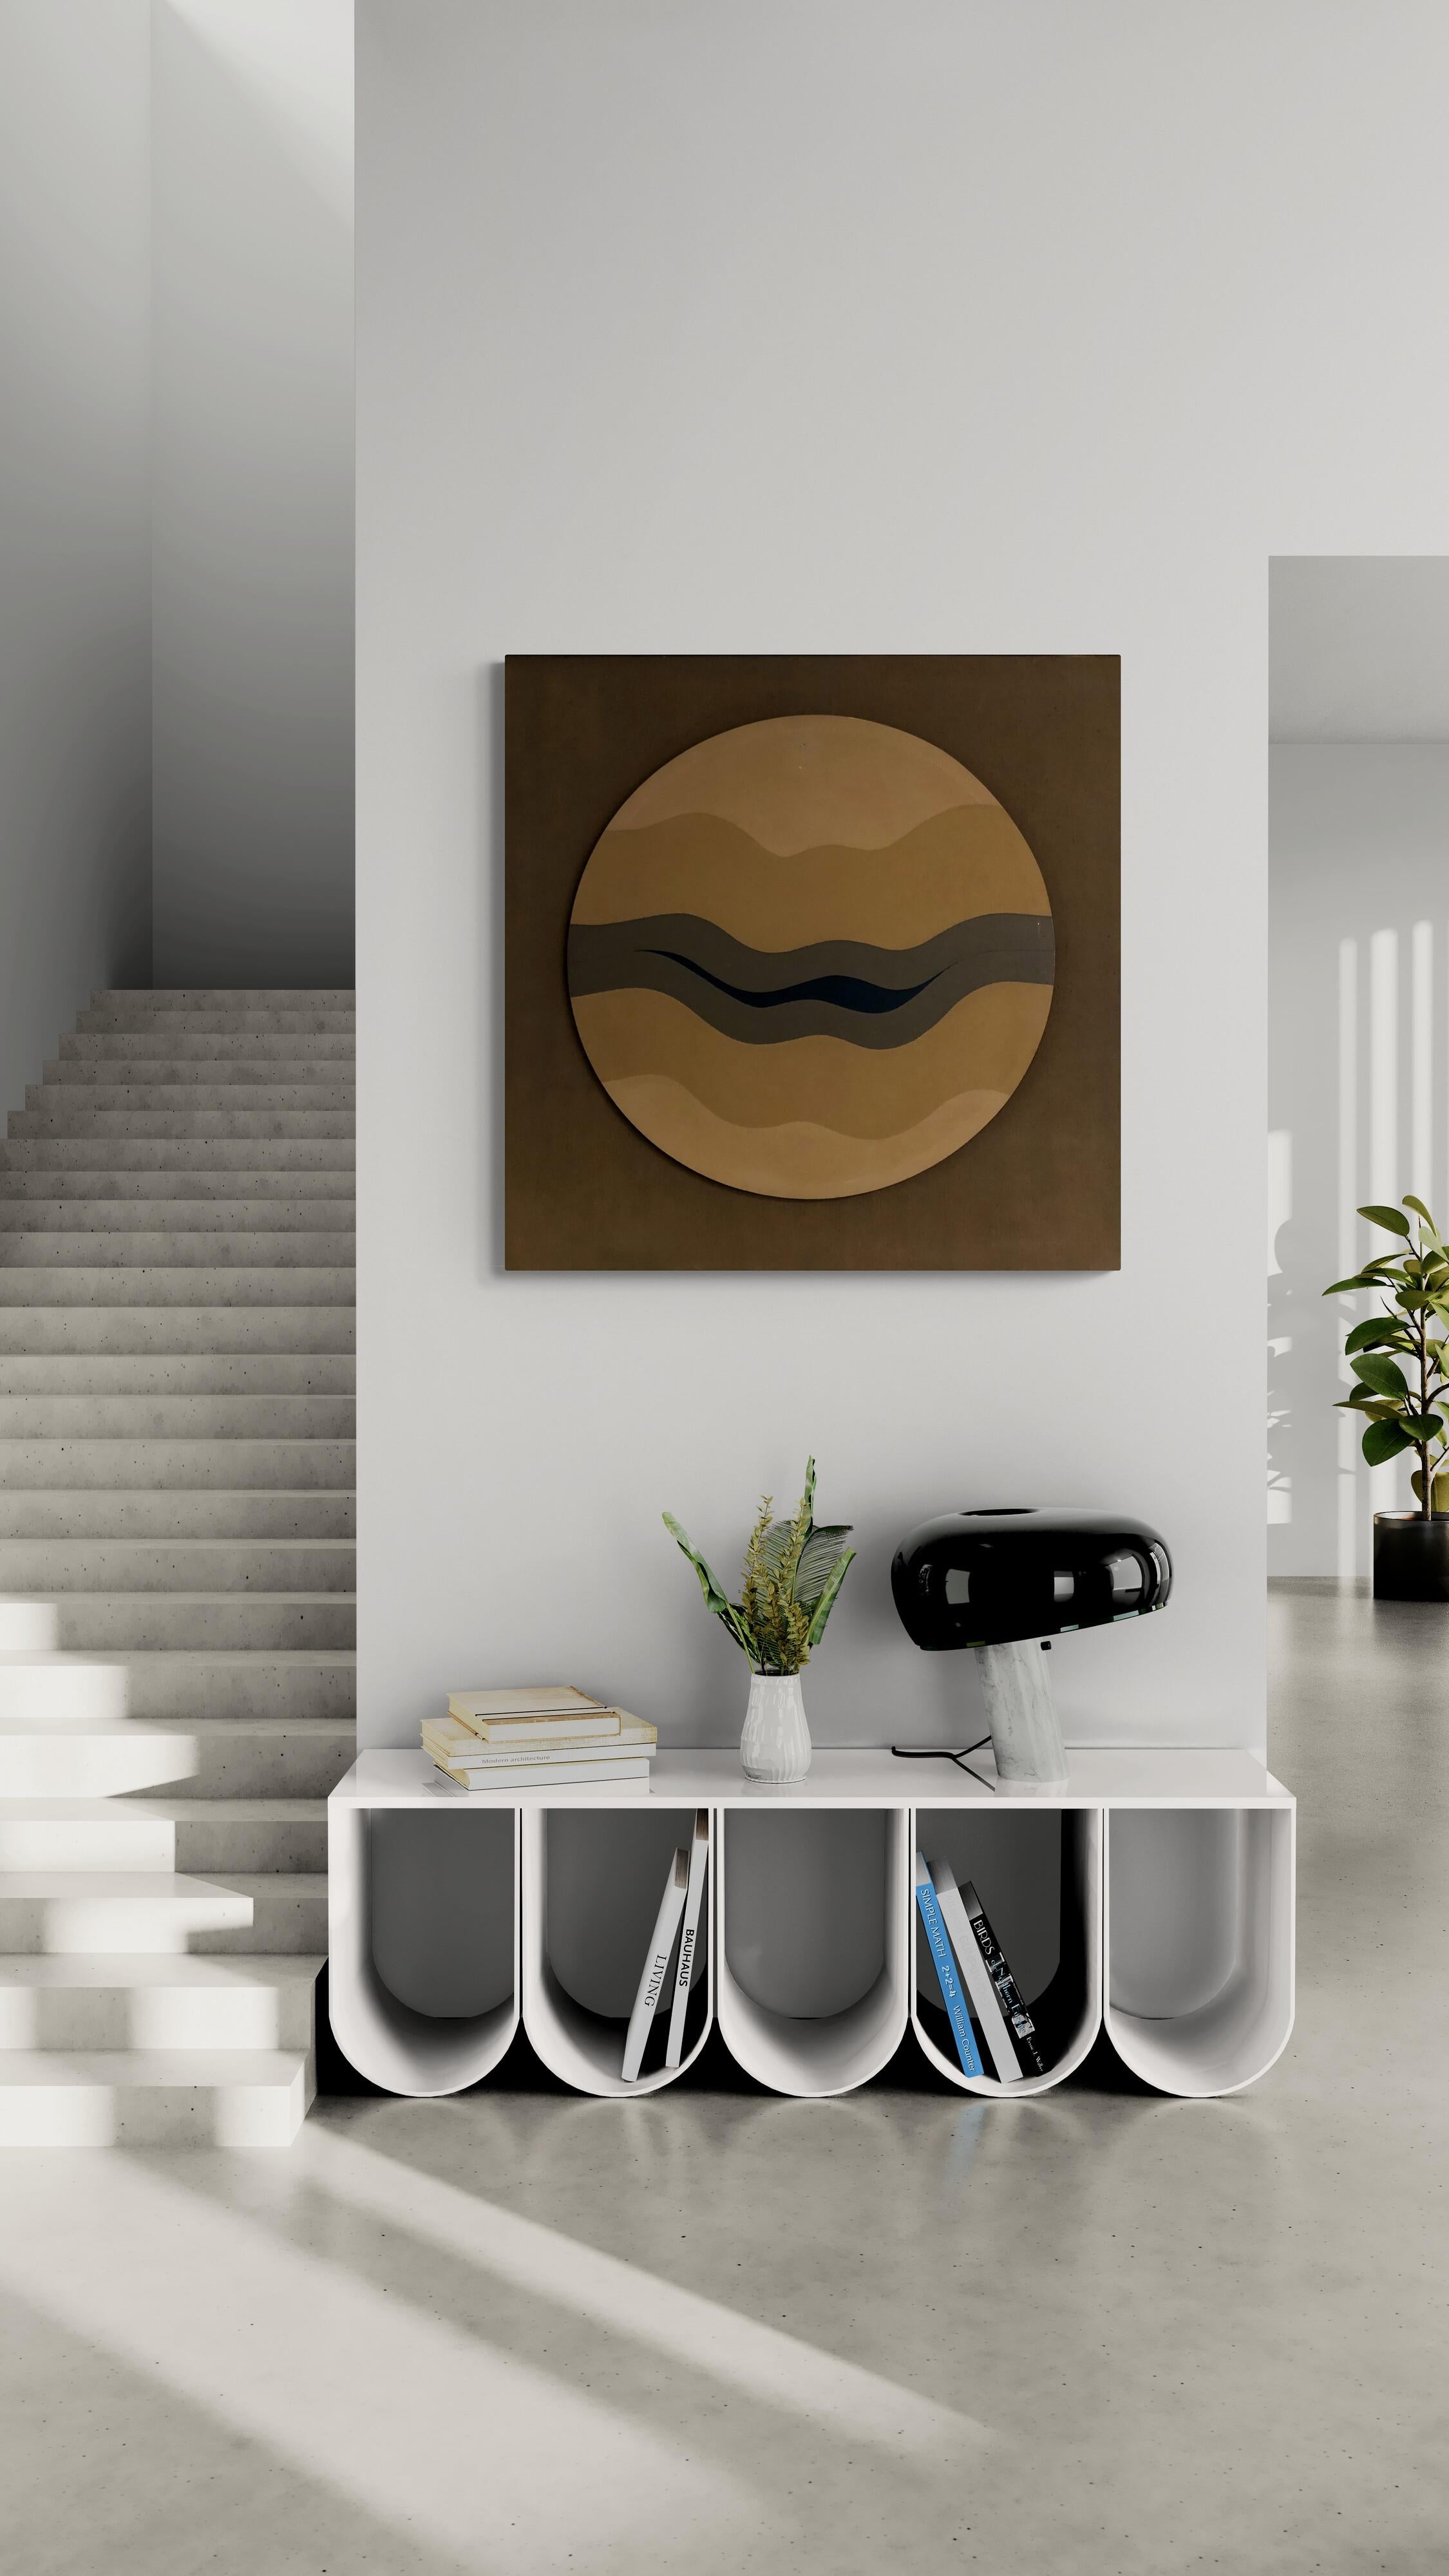 Wave Form II (Wellenform) (Square, Round, Wavy, Modern, Mid-Century) (40% OFF) - Painting by Hannes Grosse